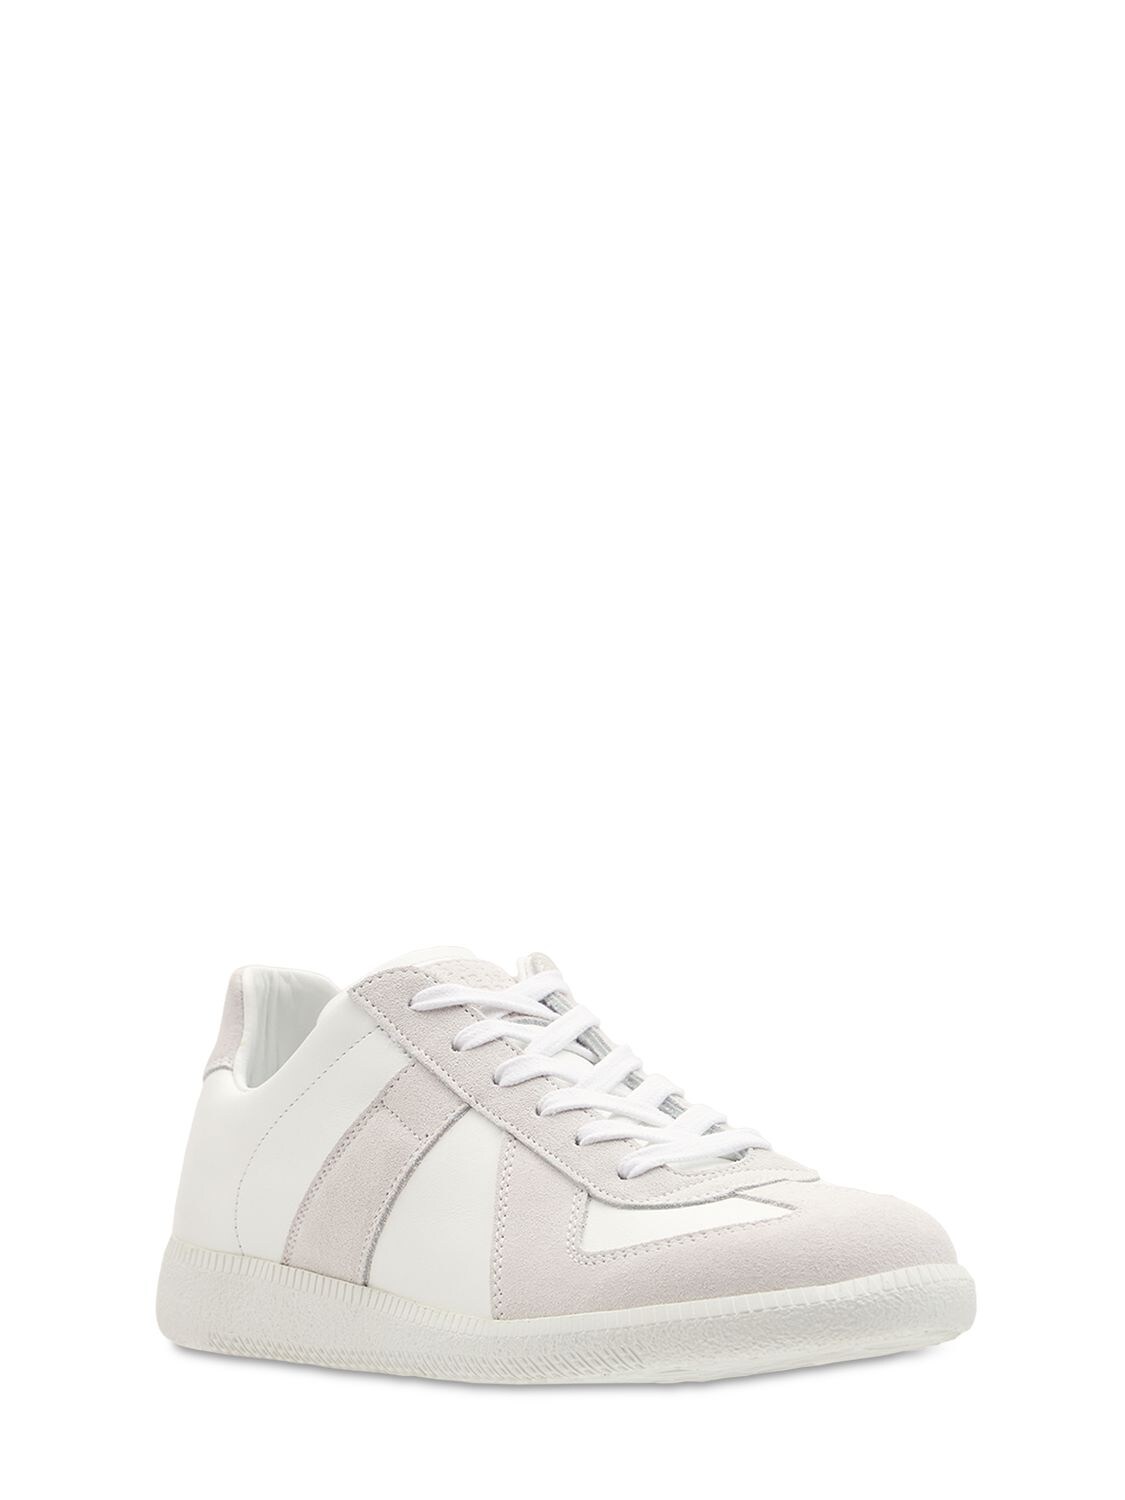 Shop Maison Margiela Replica Leather & Suede Low Top Sneakers In Off White